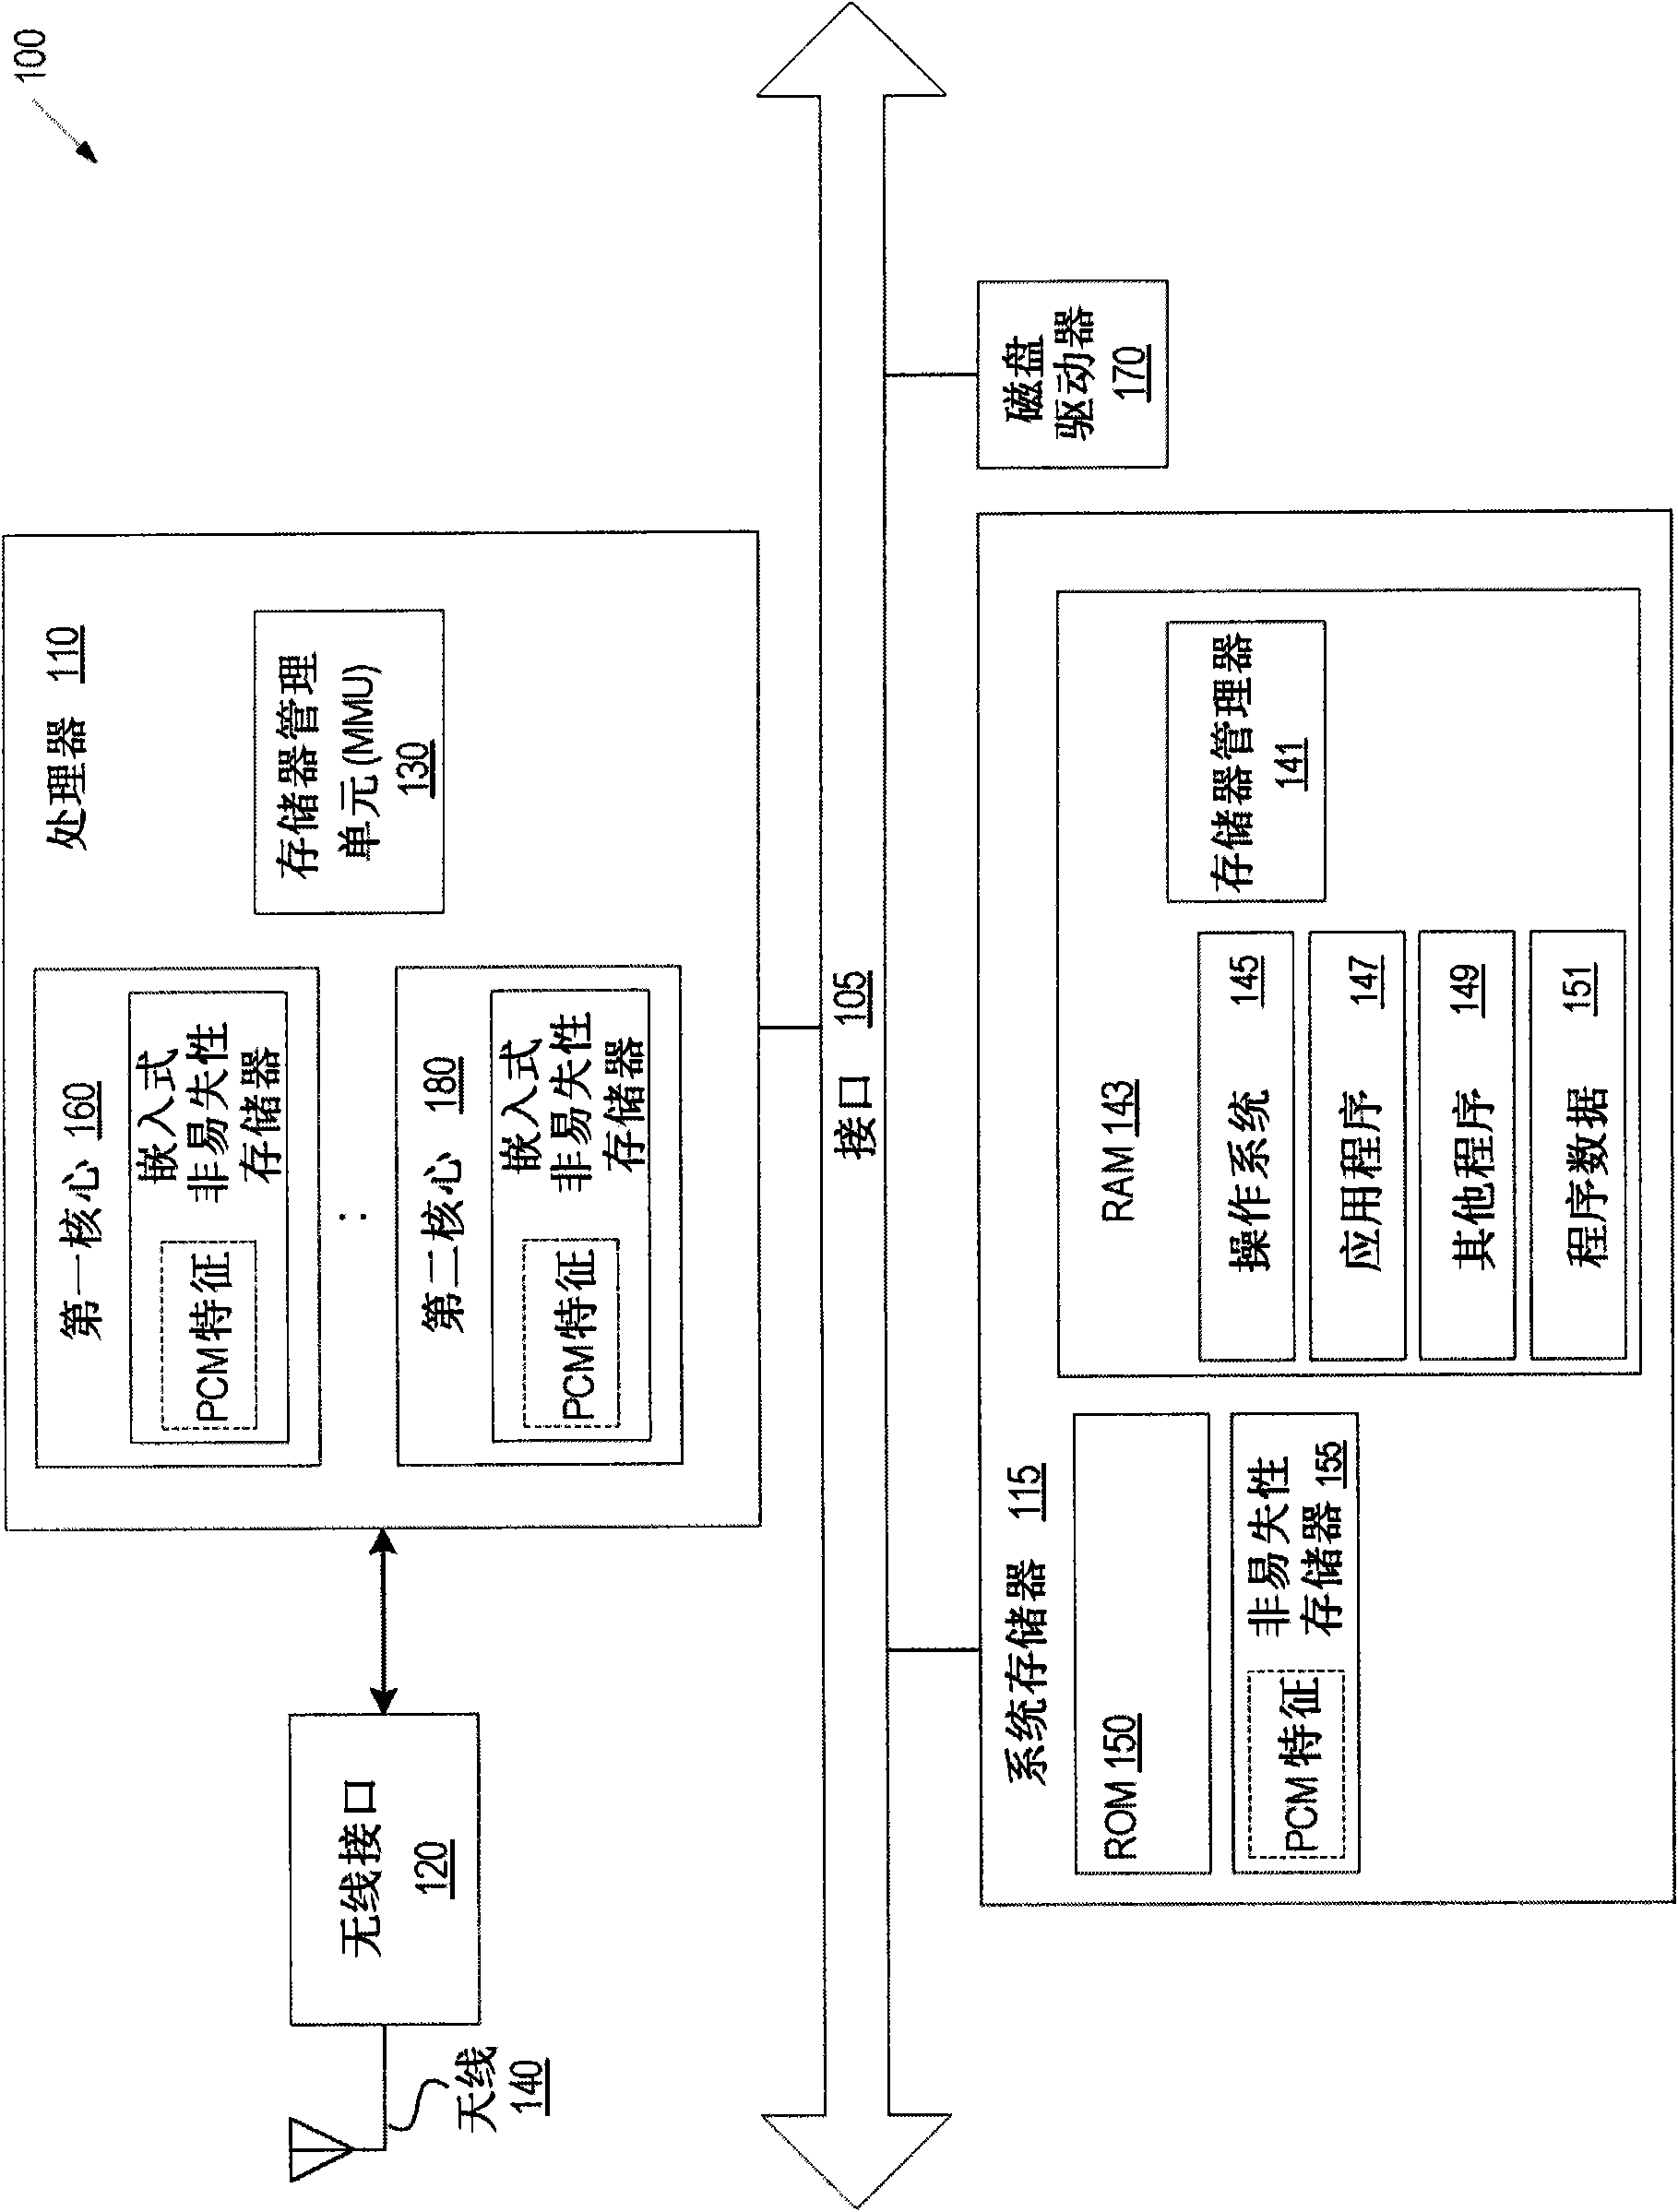 Method and apparatus to profile RAM memory objects for displacement with nonvolatile memory